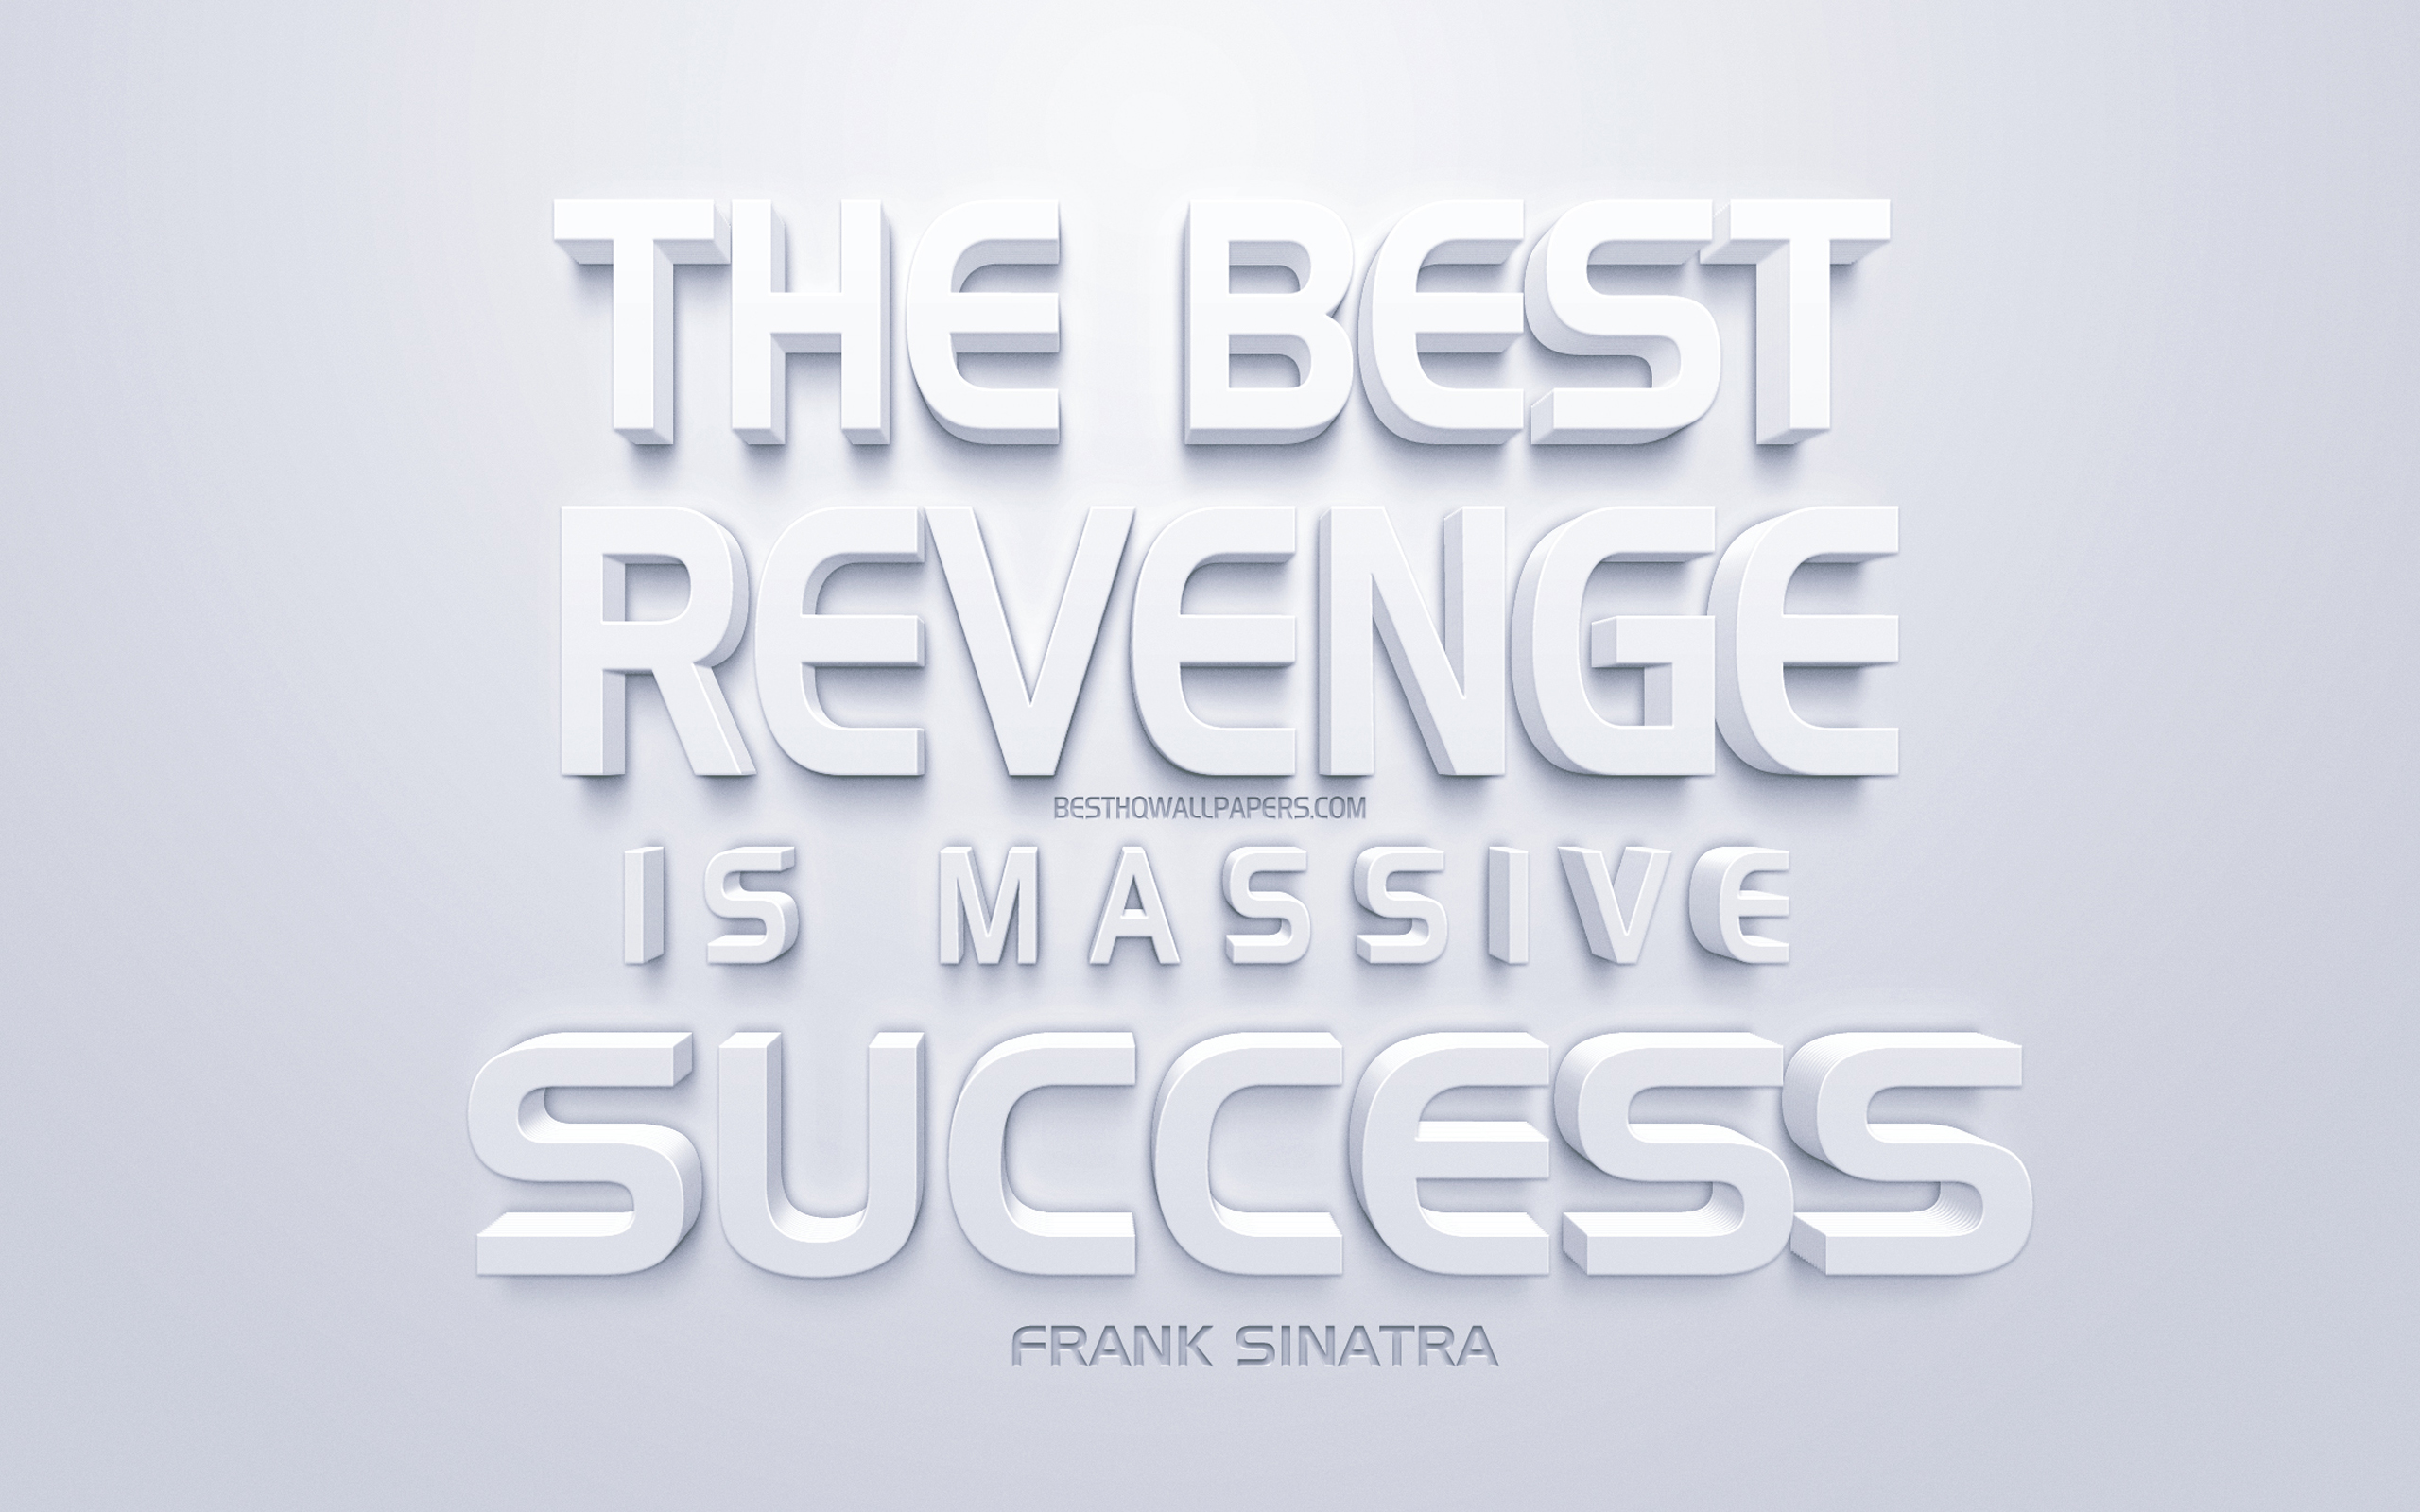 revenge quotes wallpapers